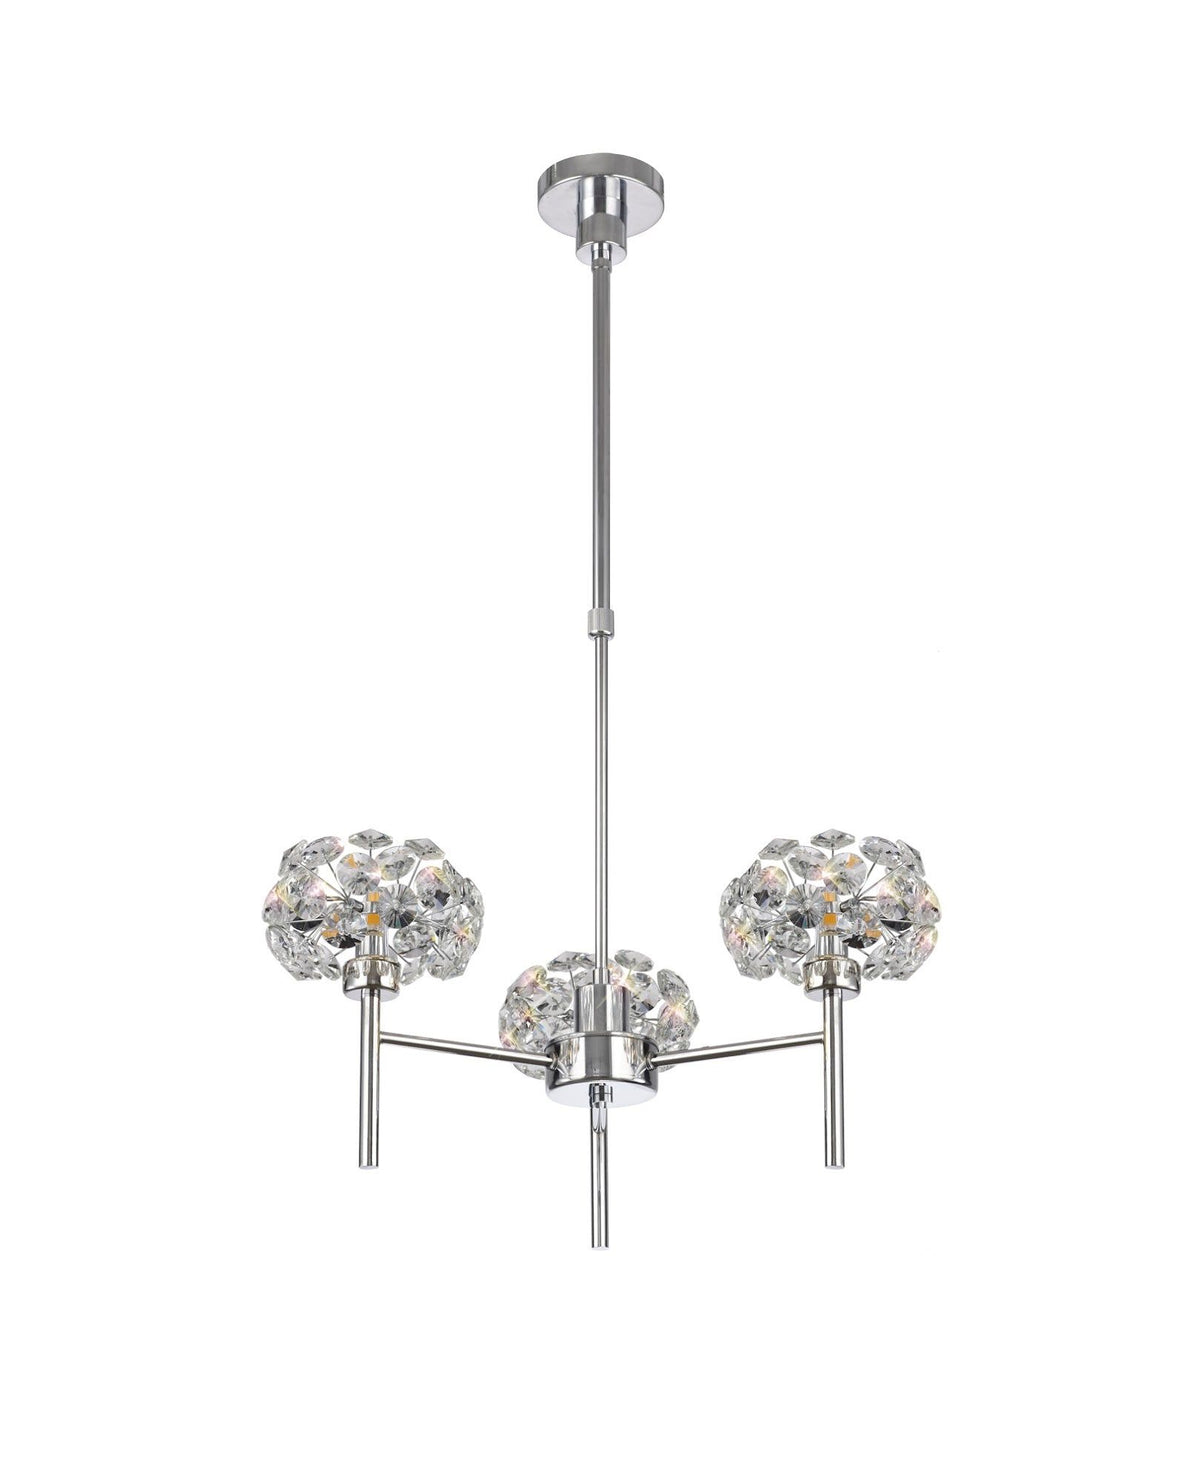 Cassis/Sophia 3 Light G9 Telescopic Light With Polished Chrome And Crystal Shade